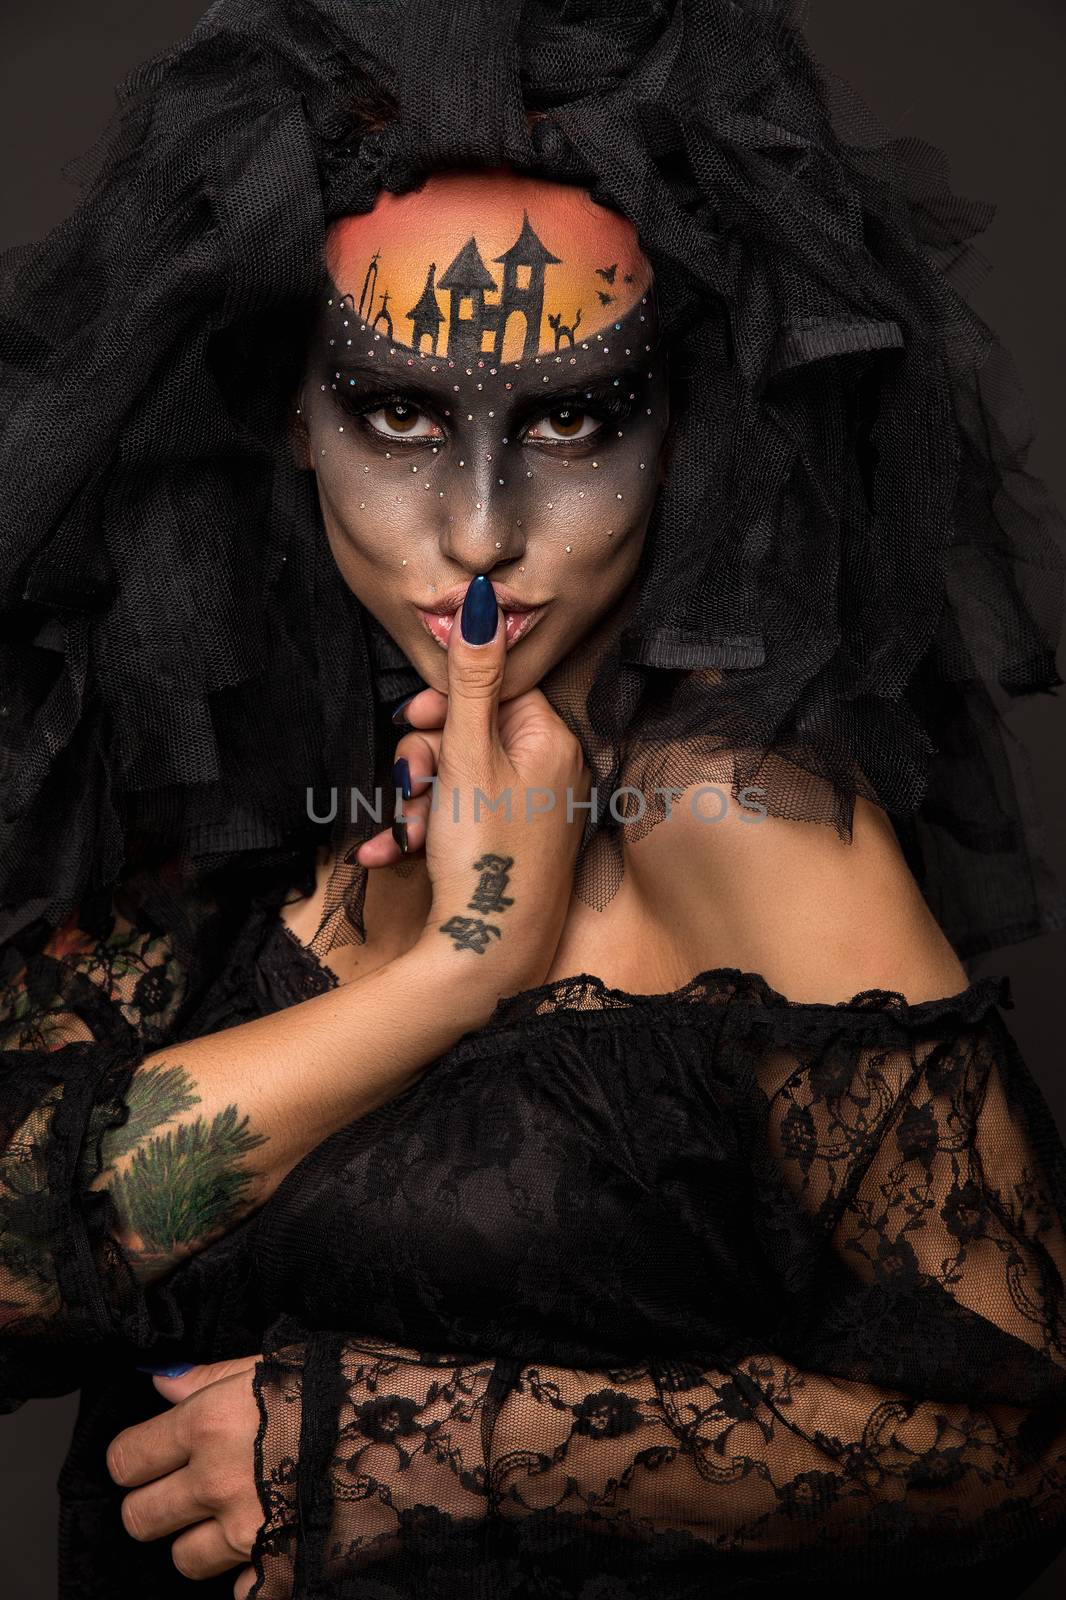 Halloween devil's bride. Portrait of young woman in dark artistic image with scary makeup, veil and terrible picture on her forehead.